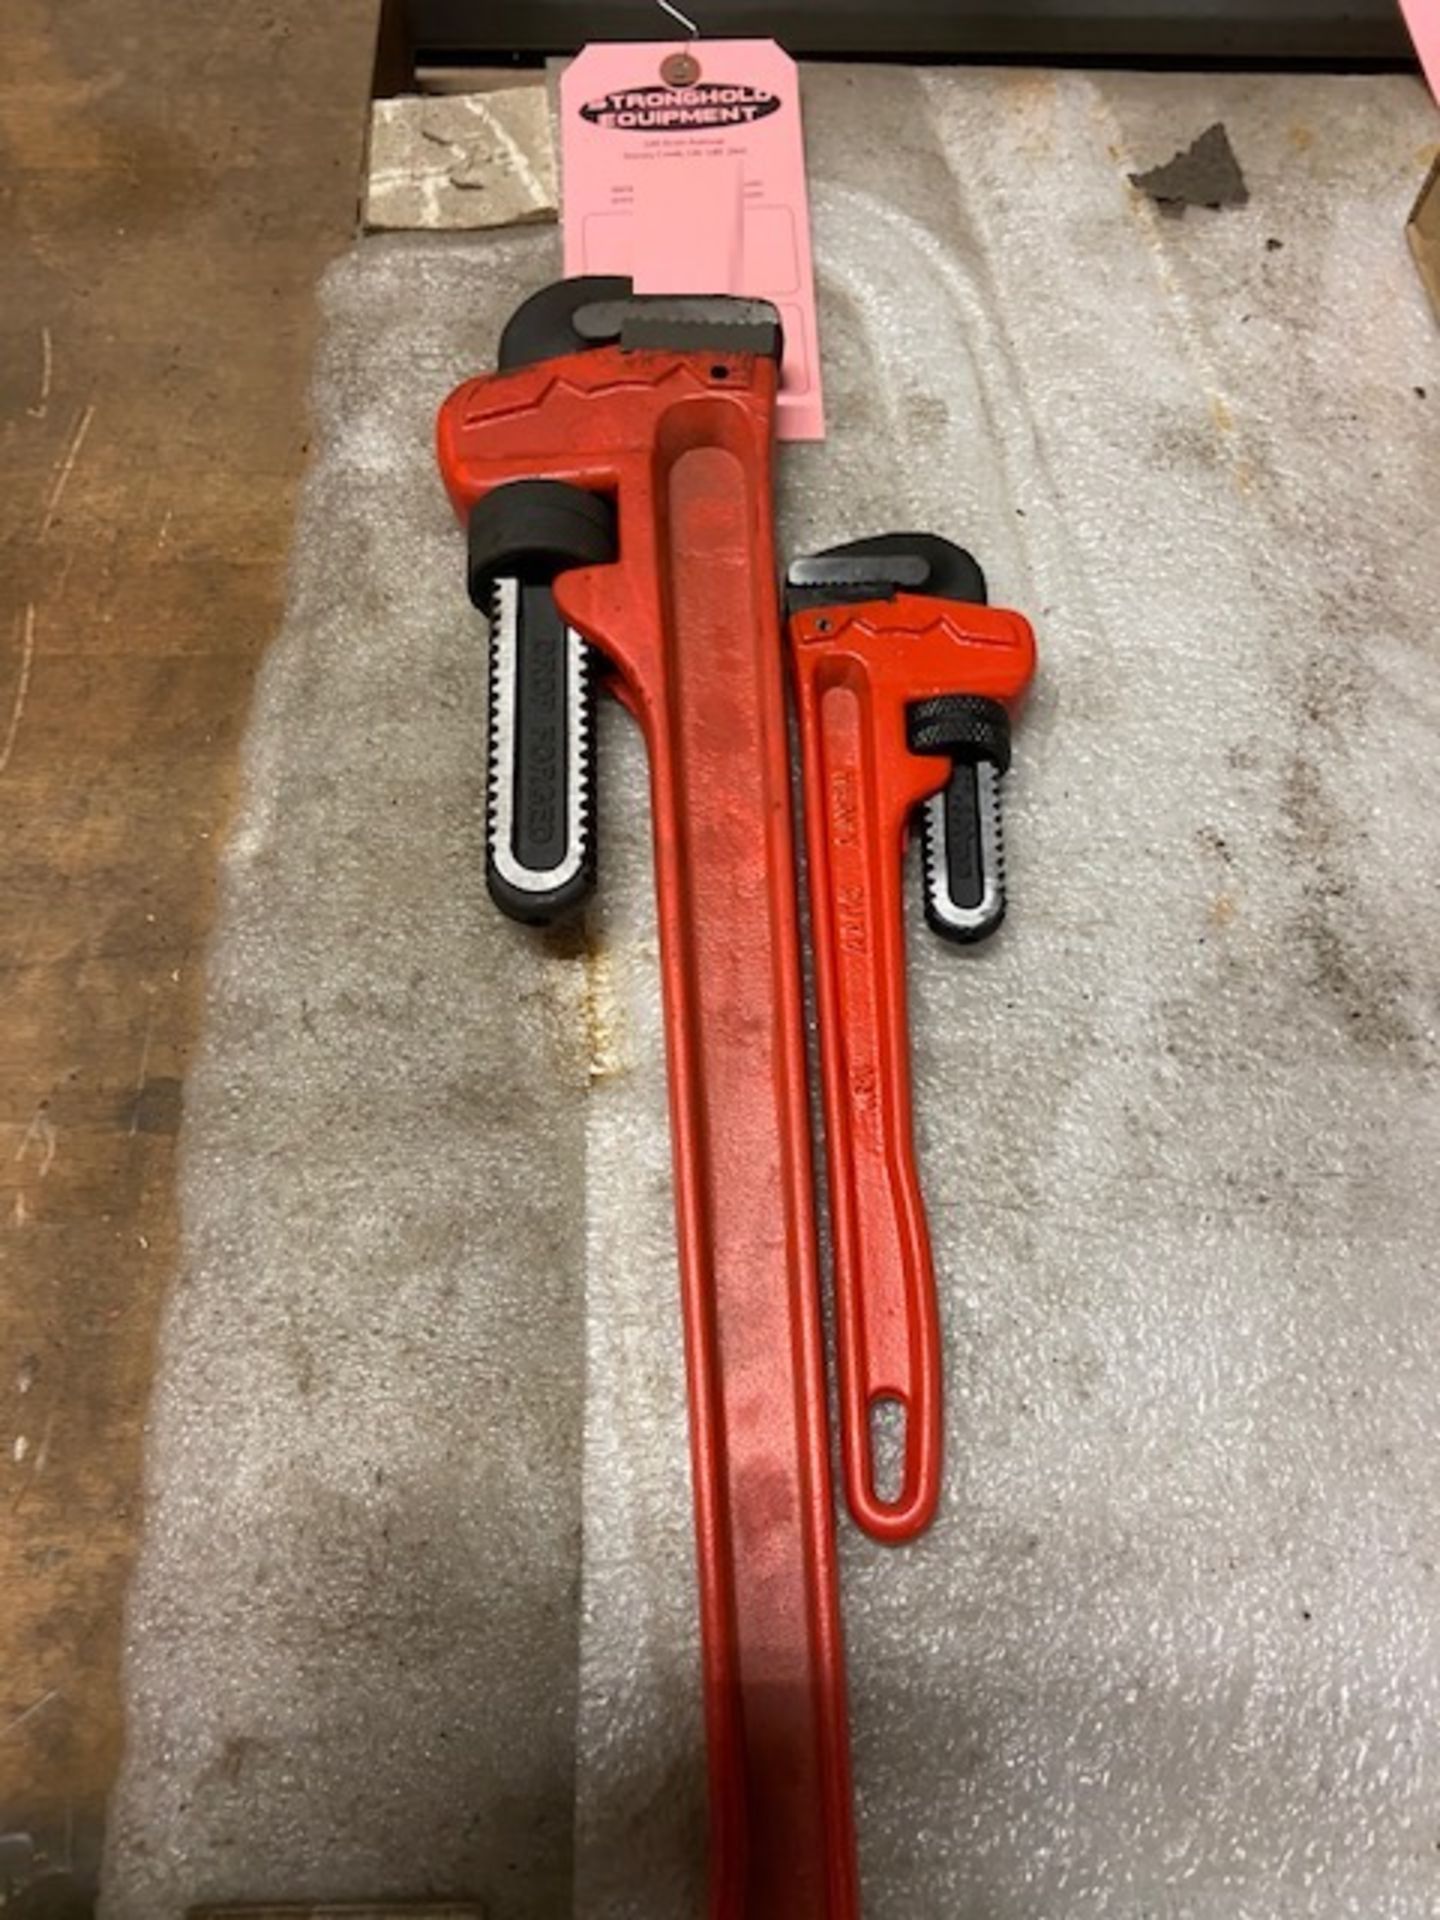 Lot of 2 (2 units) Pipe Wrenches 10" and 20"